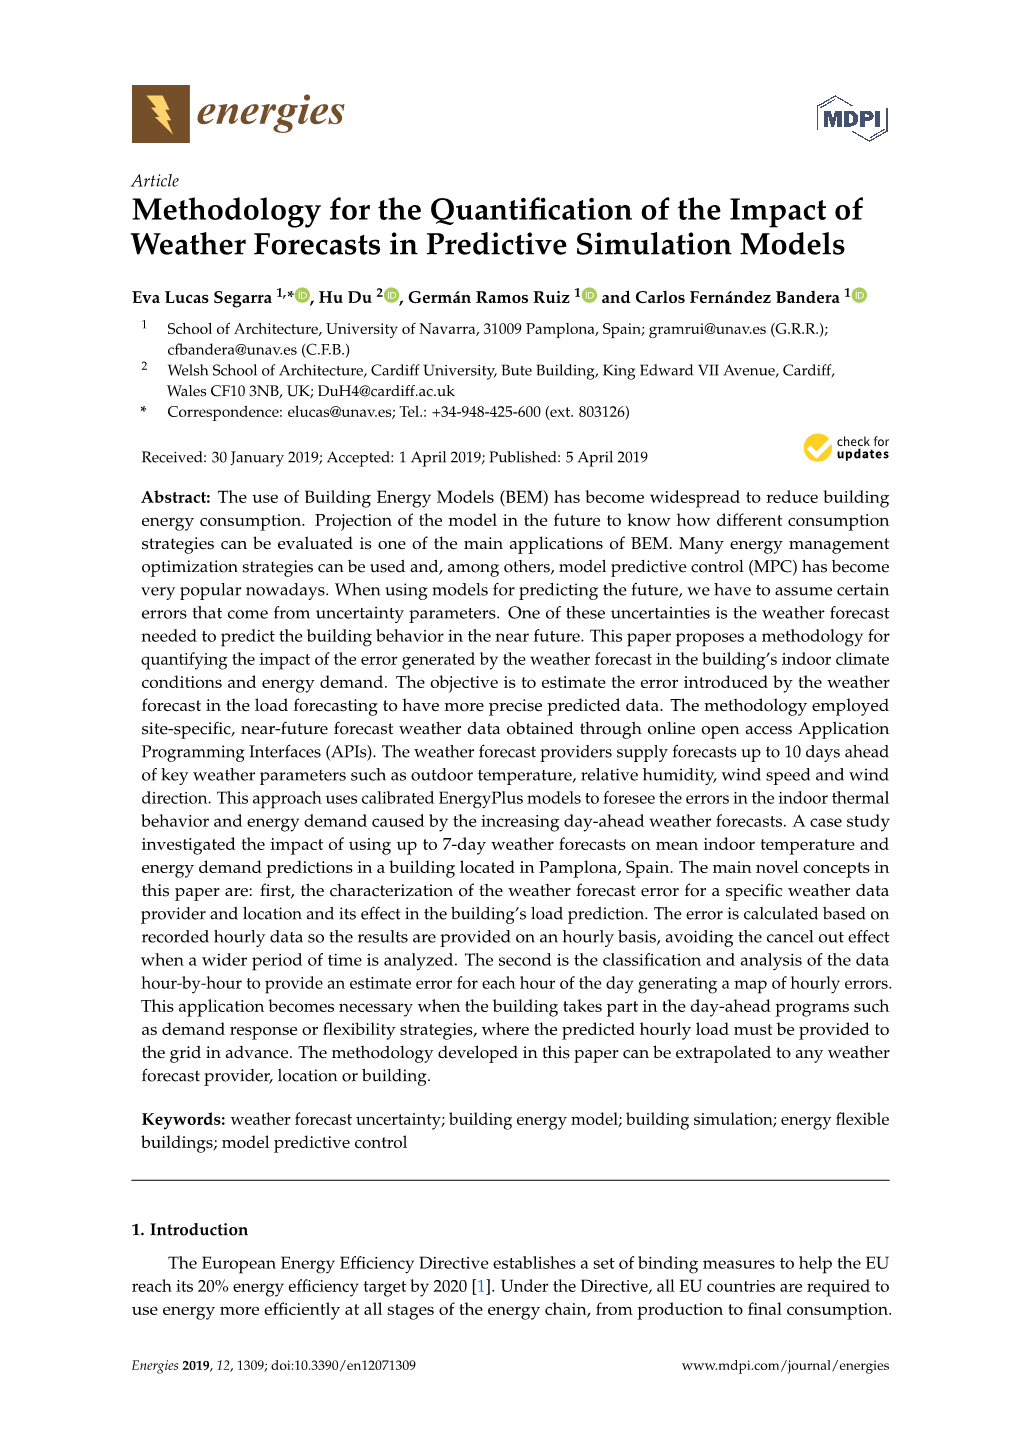 Methodology for the Quantification of the Impact of Weather Forecasts In